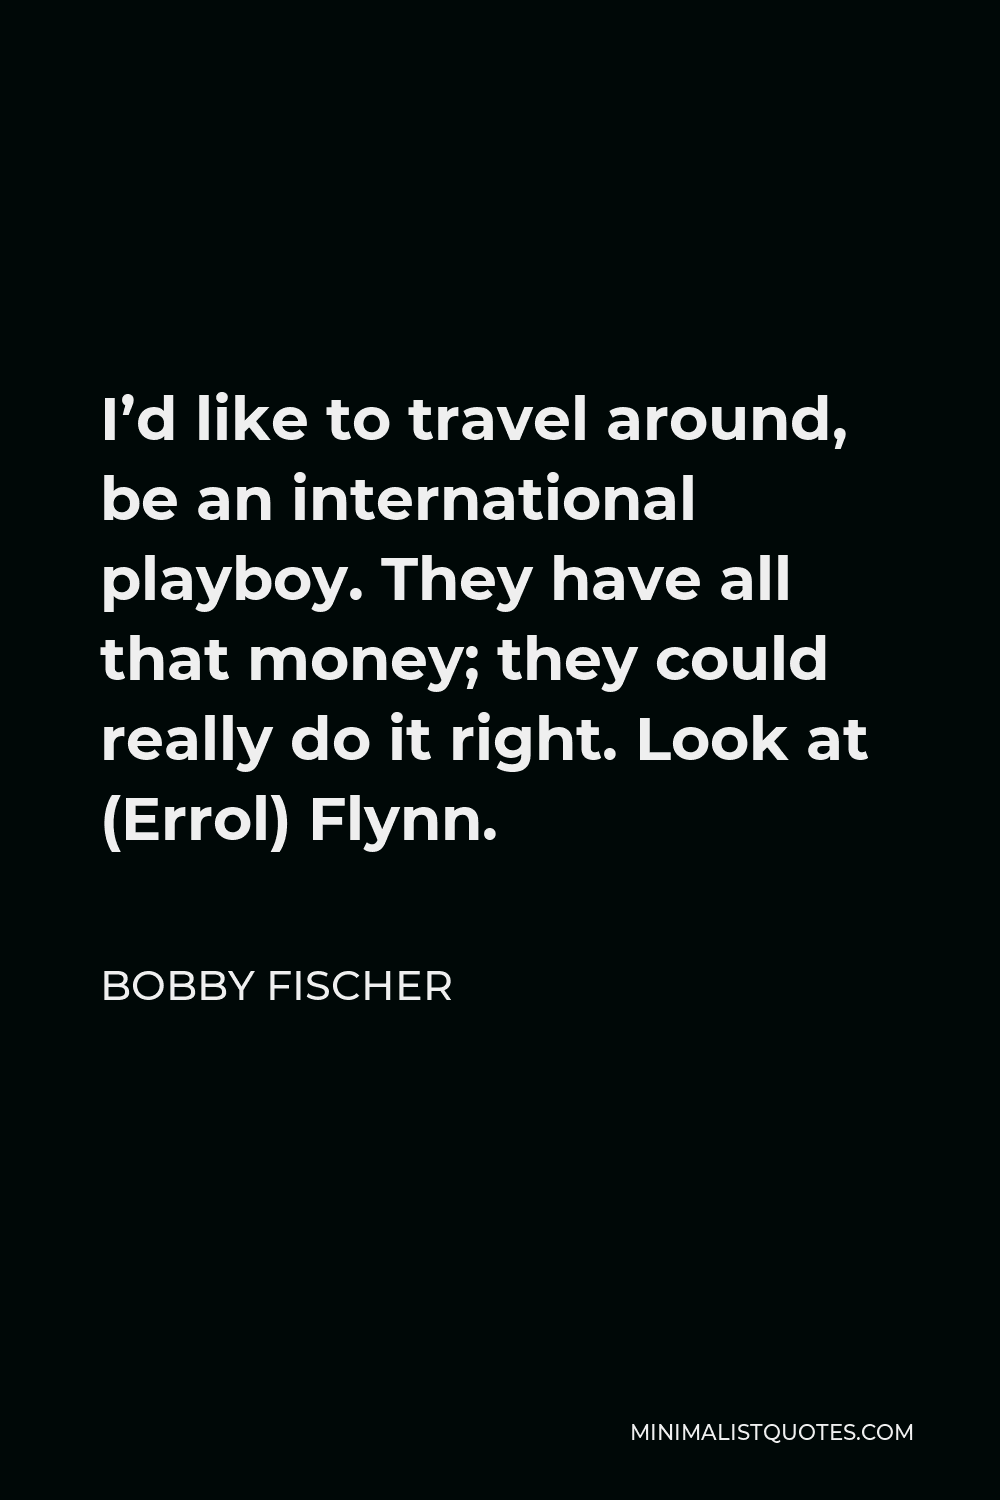 Bobby Fischer Quote - I’d like to travel around, be an international playboy. They have all that money; they could really do it right. Look at (Errol) Flynn.